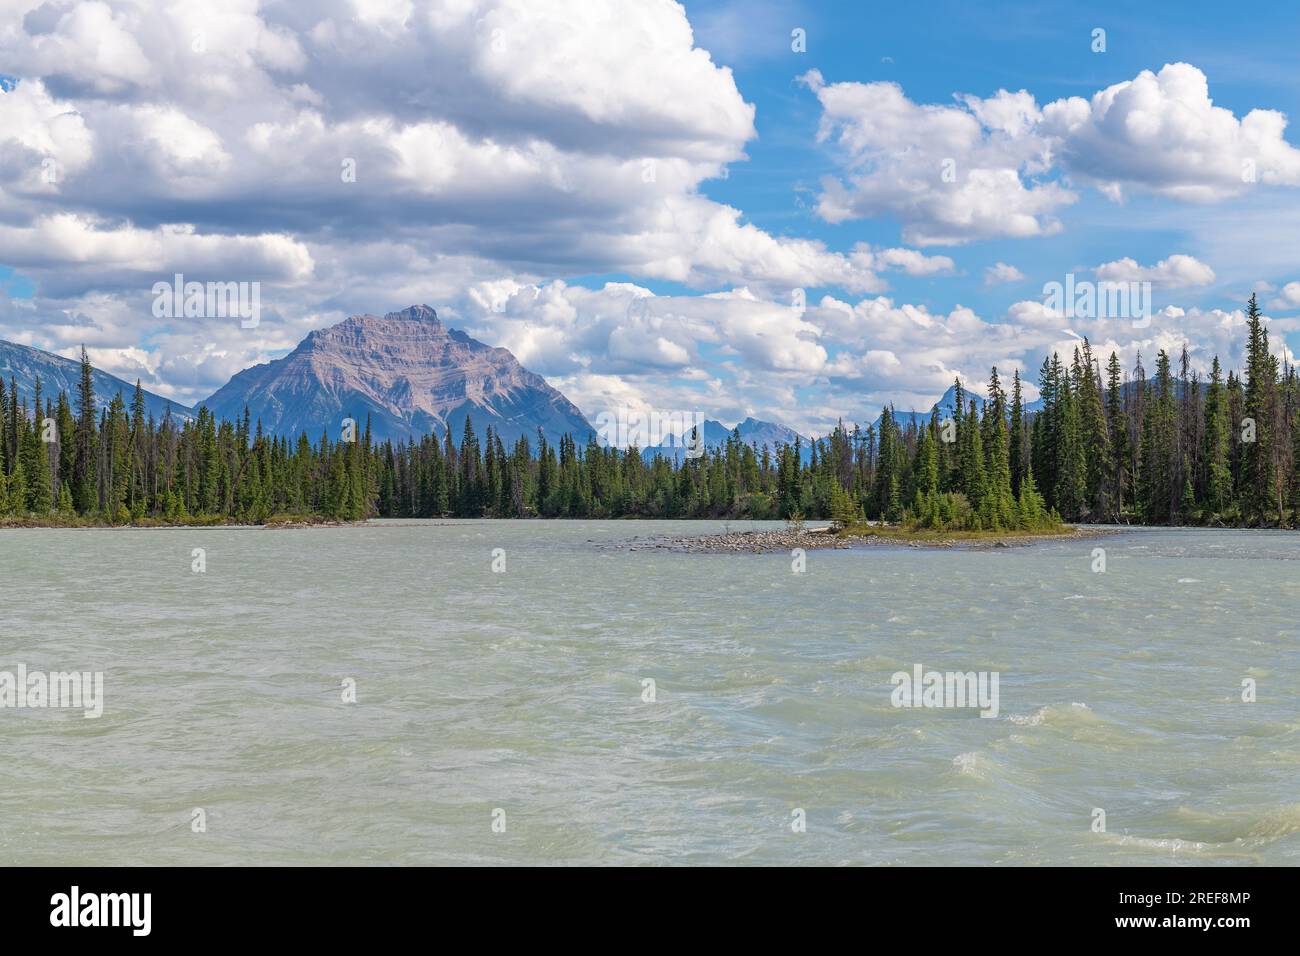 Athabasca river landscape during rafting trip, Jasper national park, Canada. Stock Photo